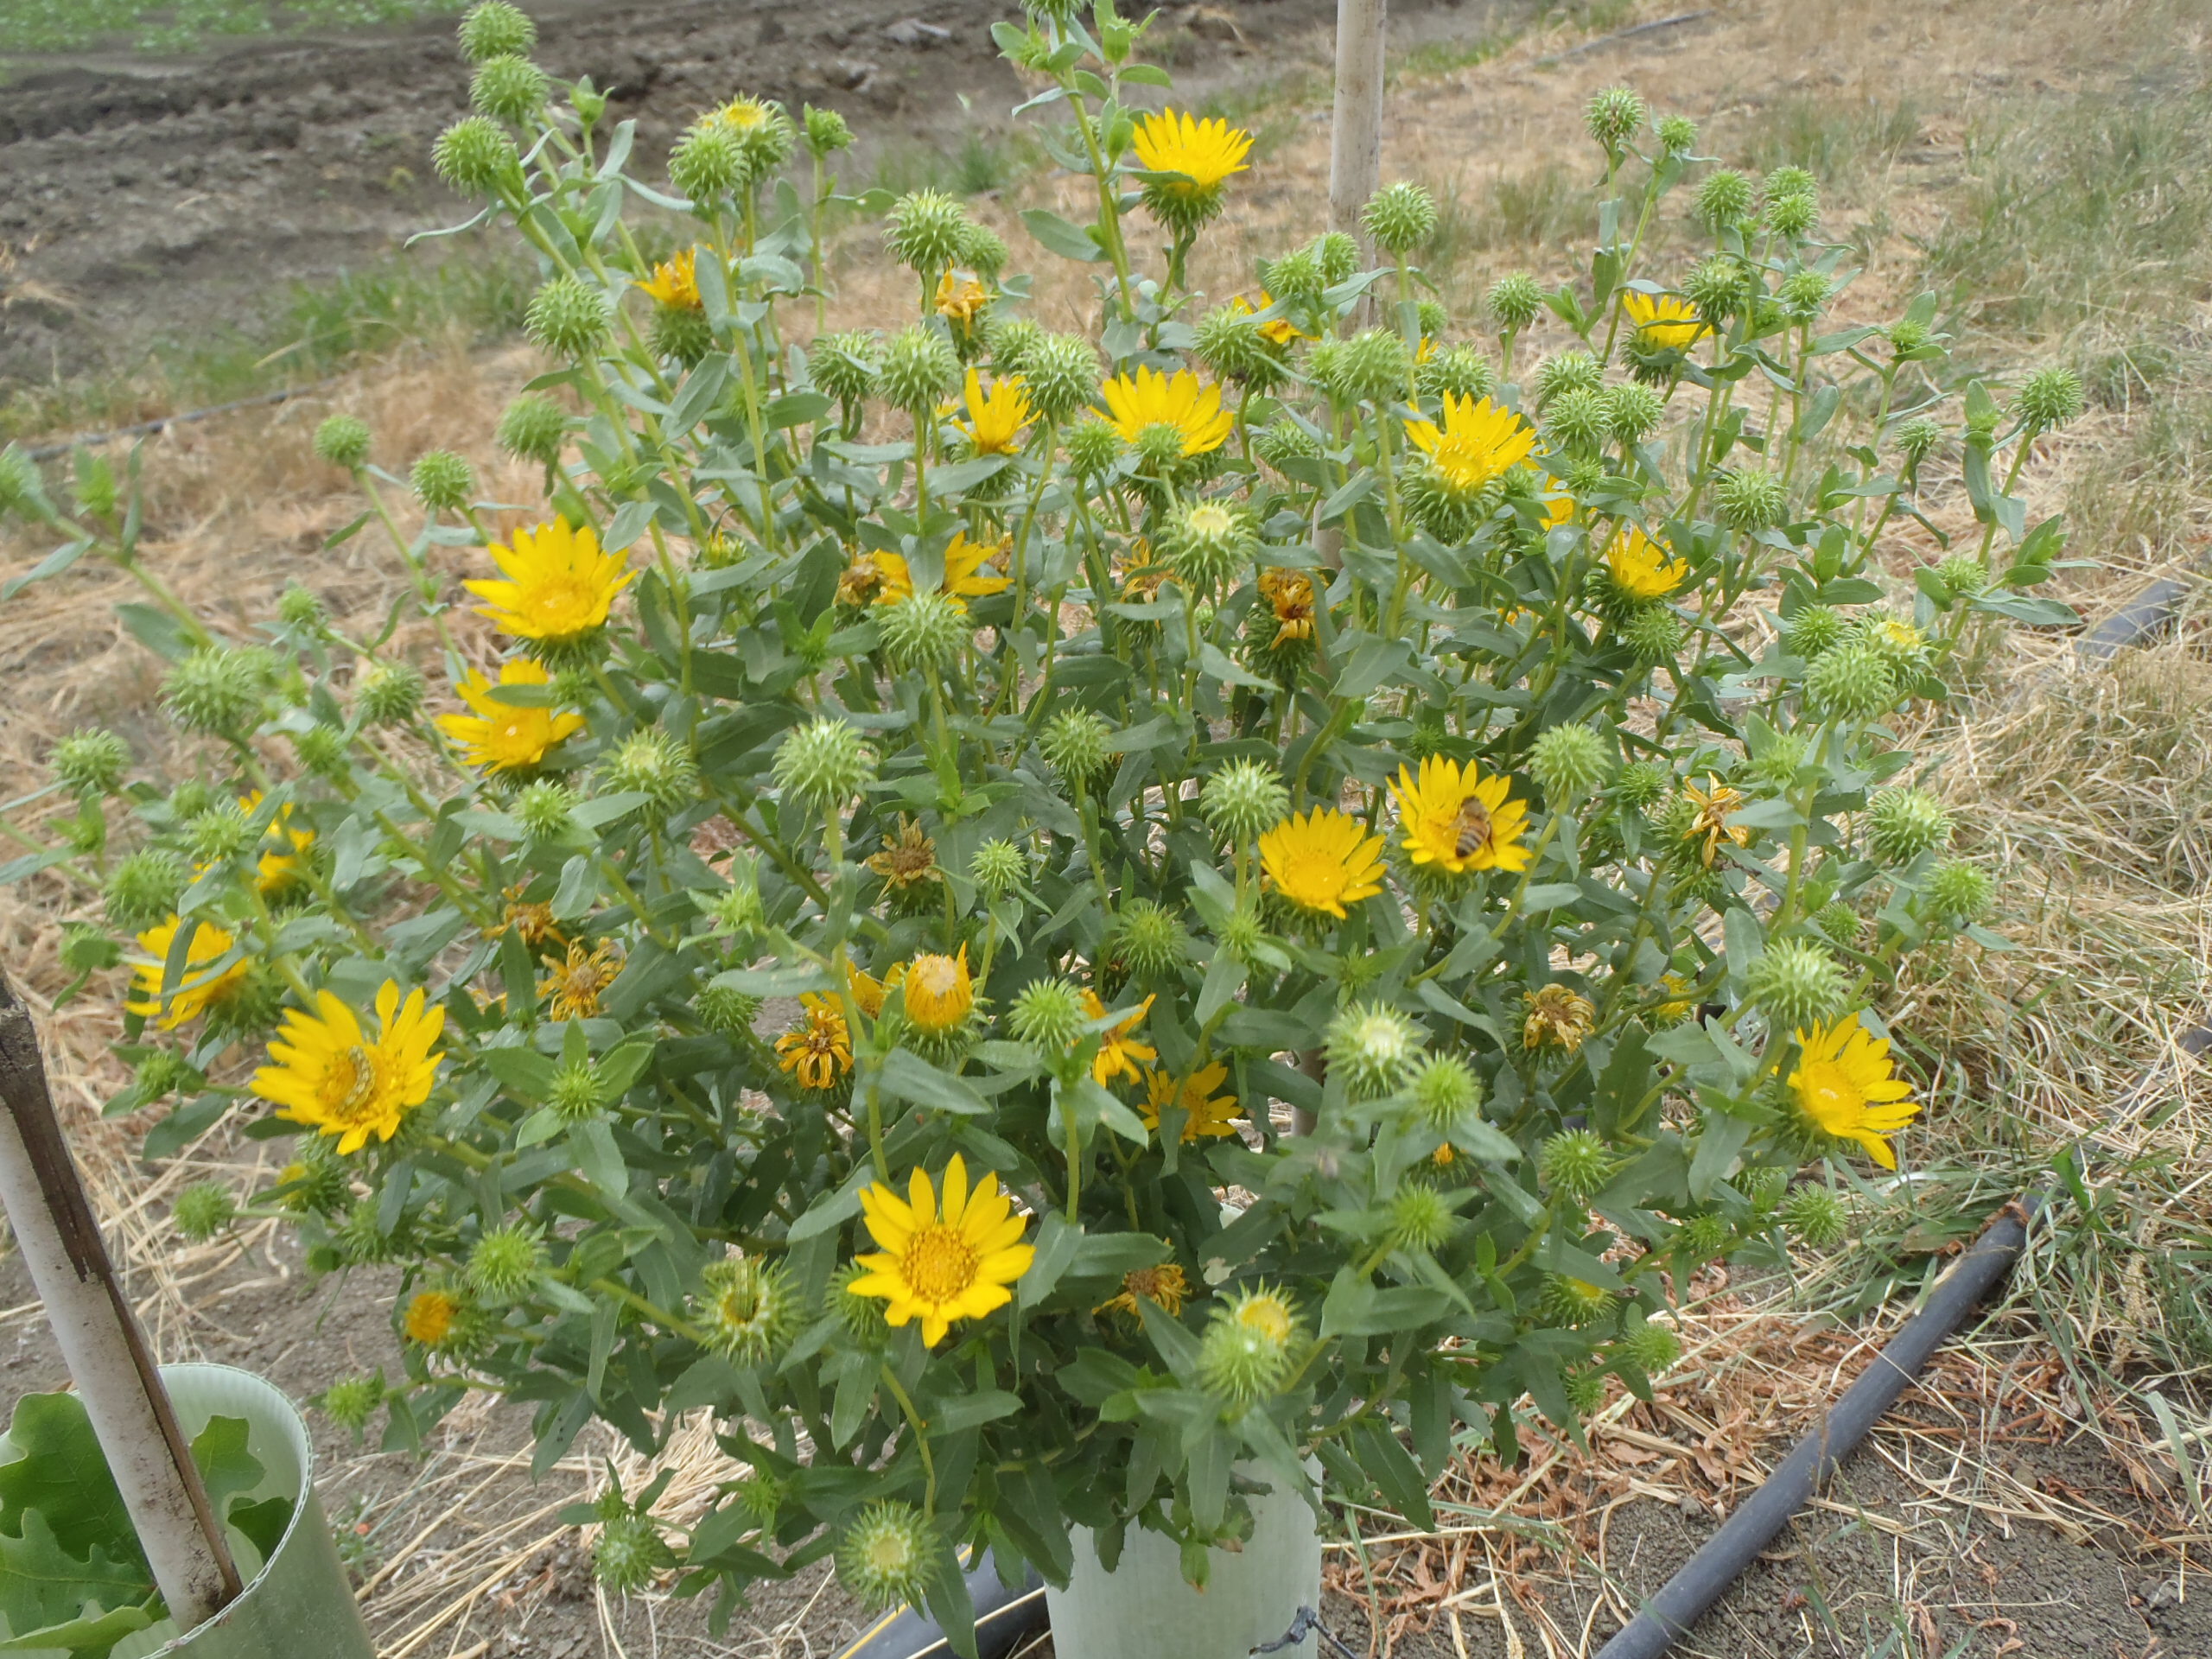 Image of great valley gumweed. Photo by Miles DaPrato.